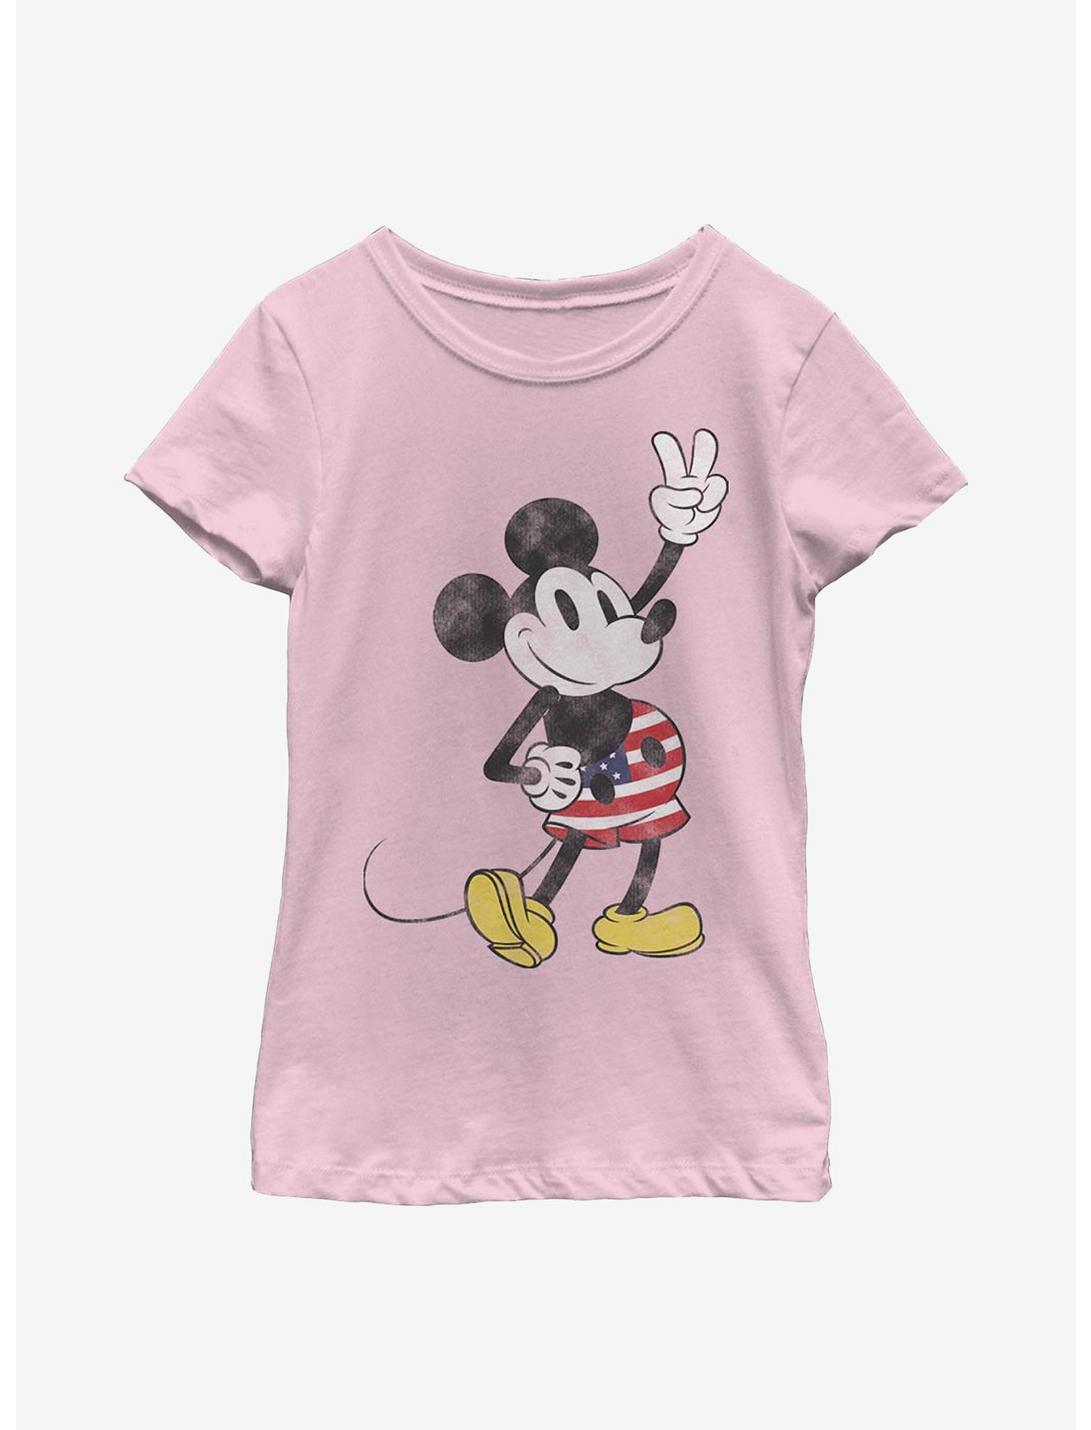 Disney Mickey Mouse American Mouse Youth Girls T-Shirt, PINK, hi-res